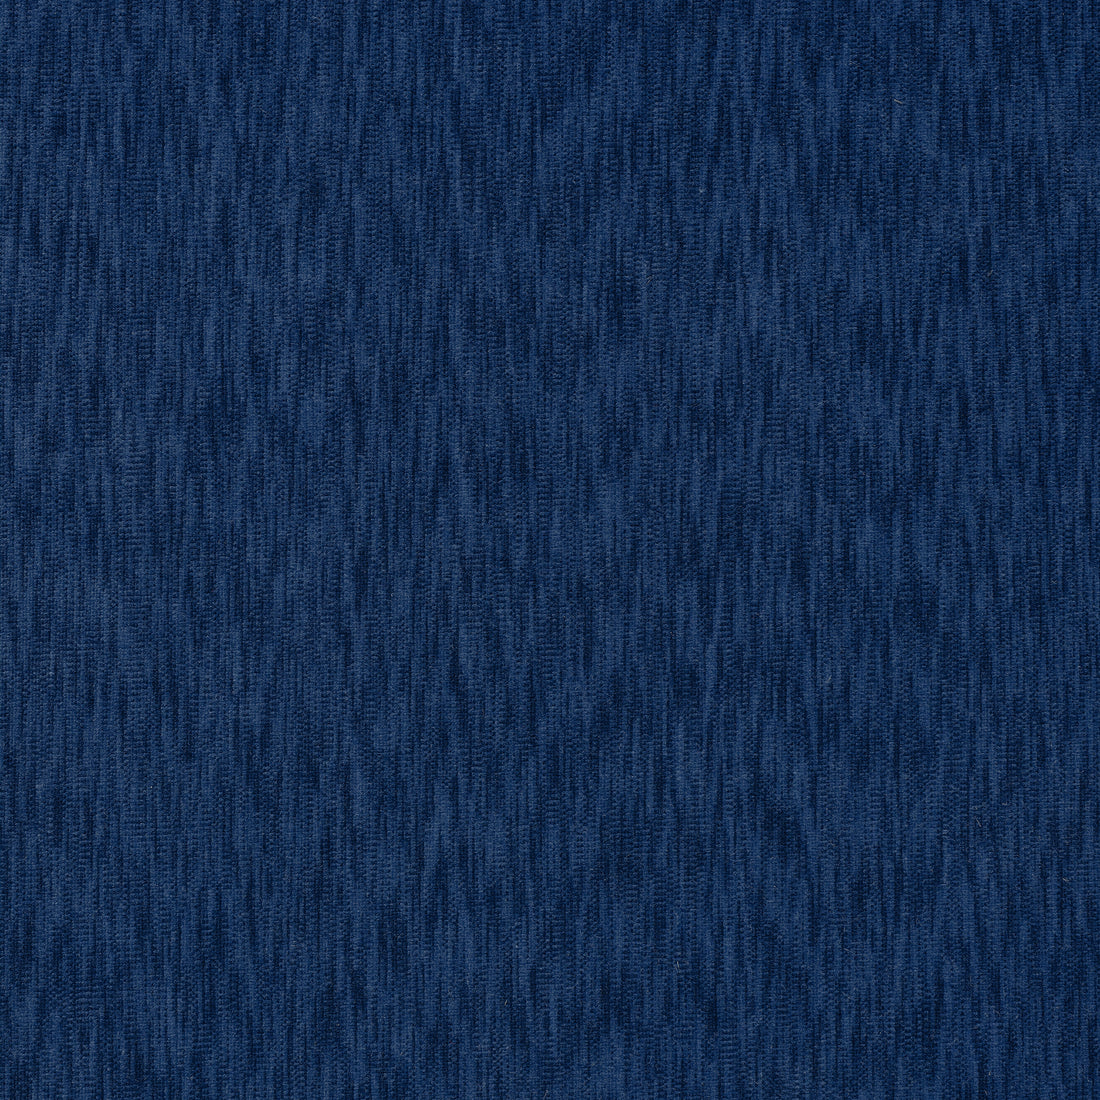 Riff Velvet fabric in navy color - pattern number W72834 - by Thibaut in the Woven Resource 13: Fusion Velvets collection